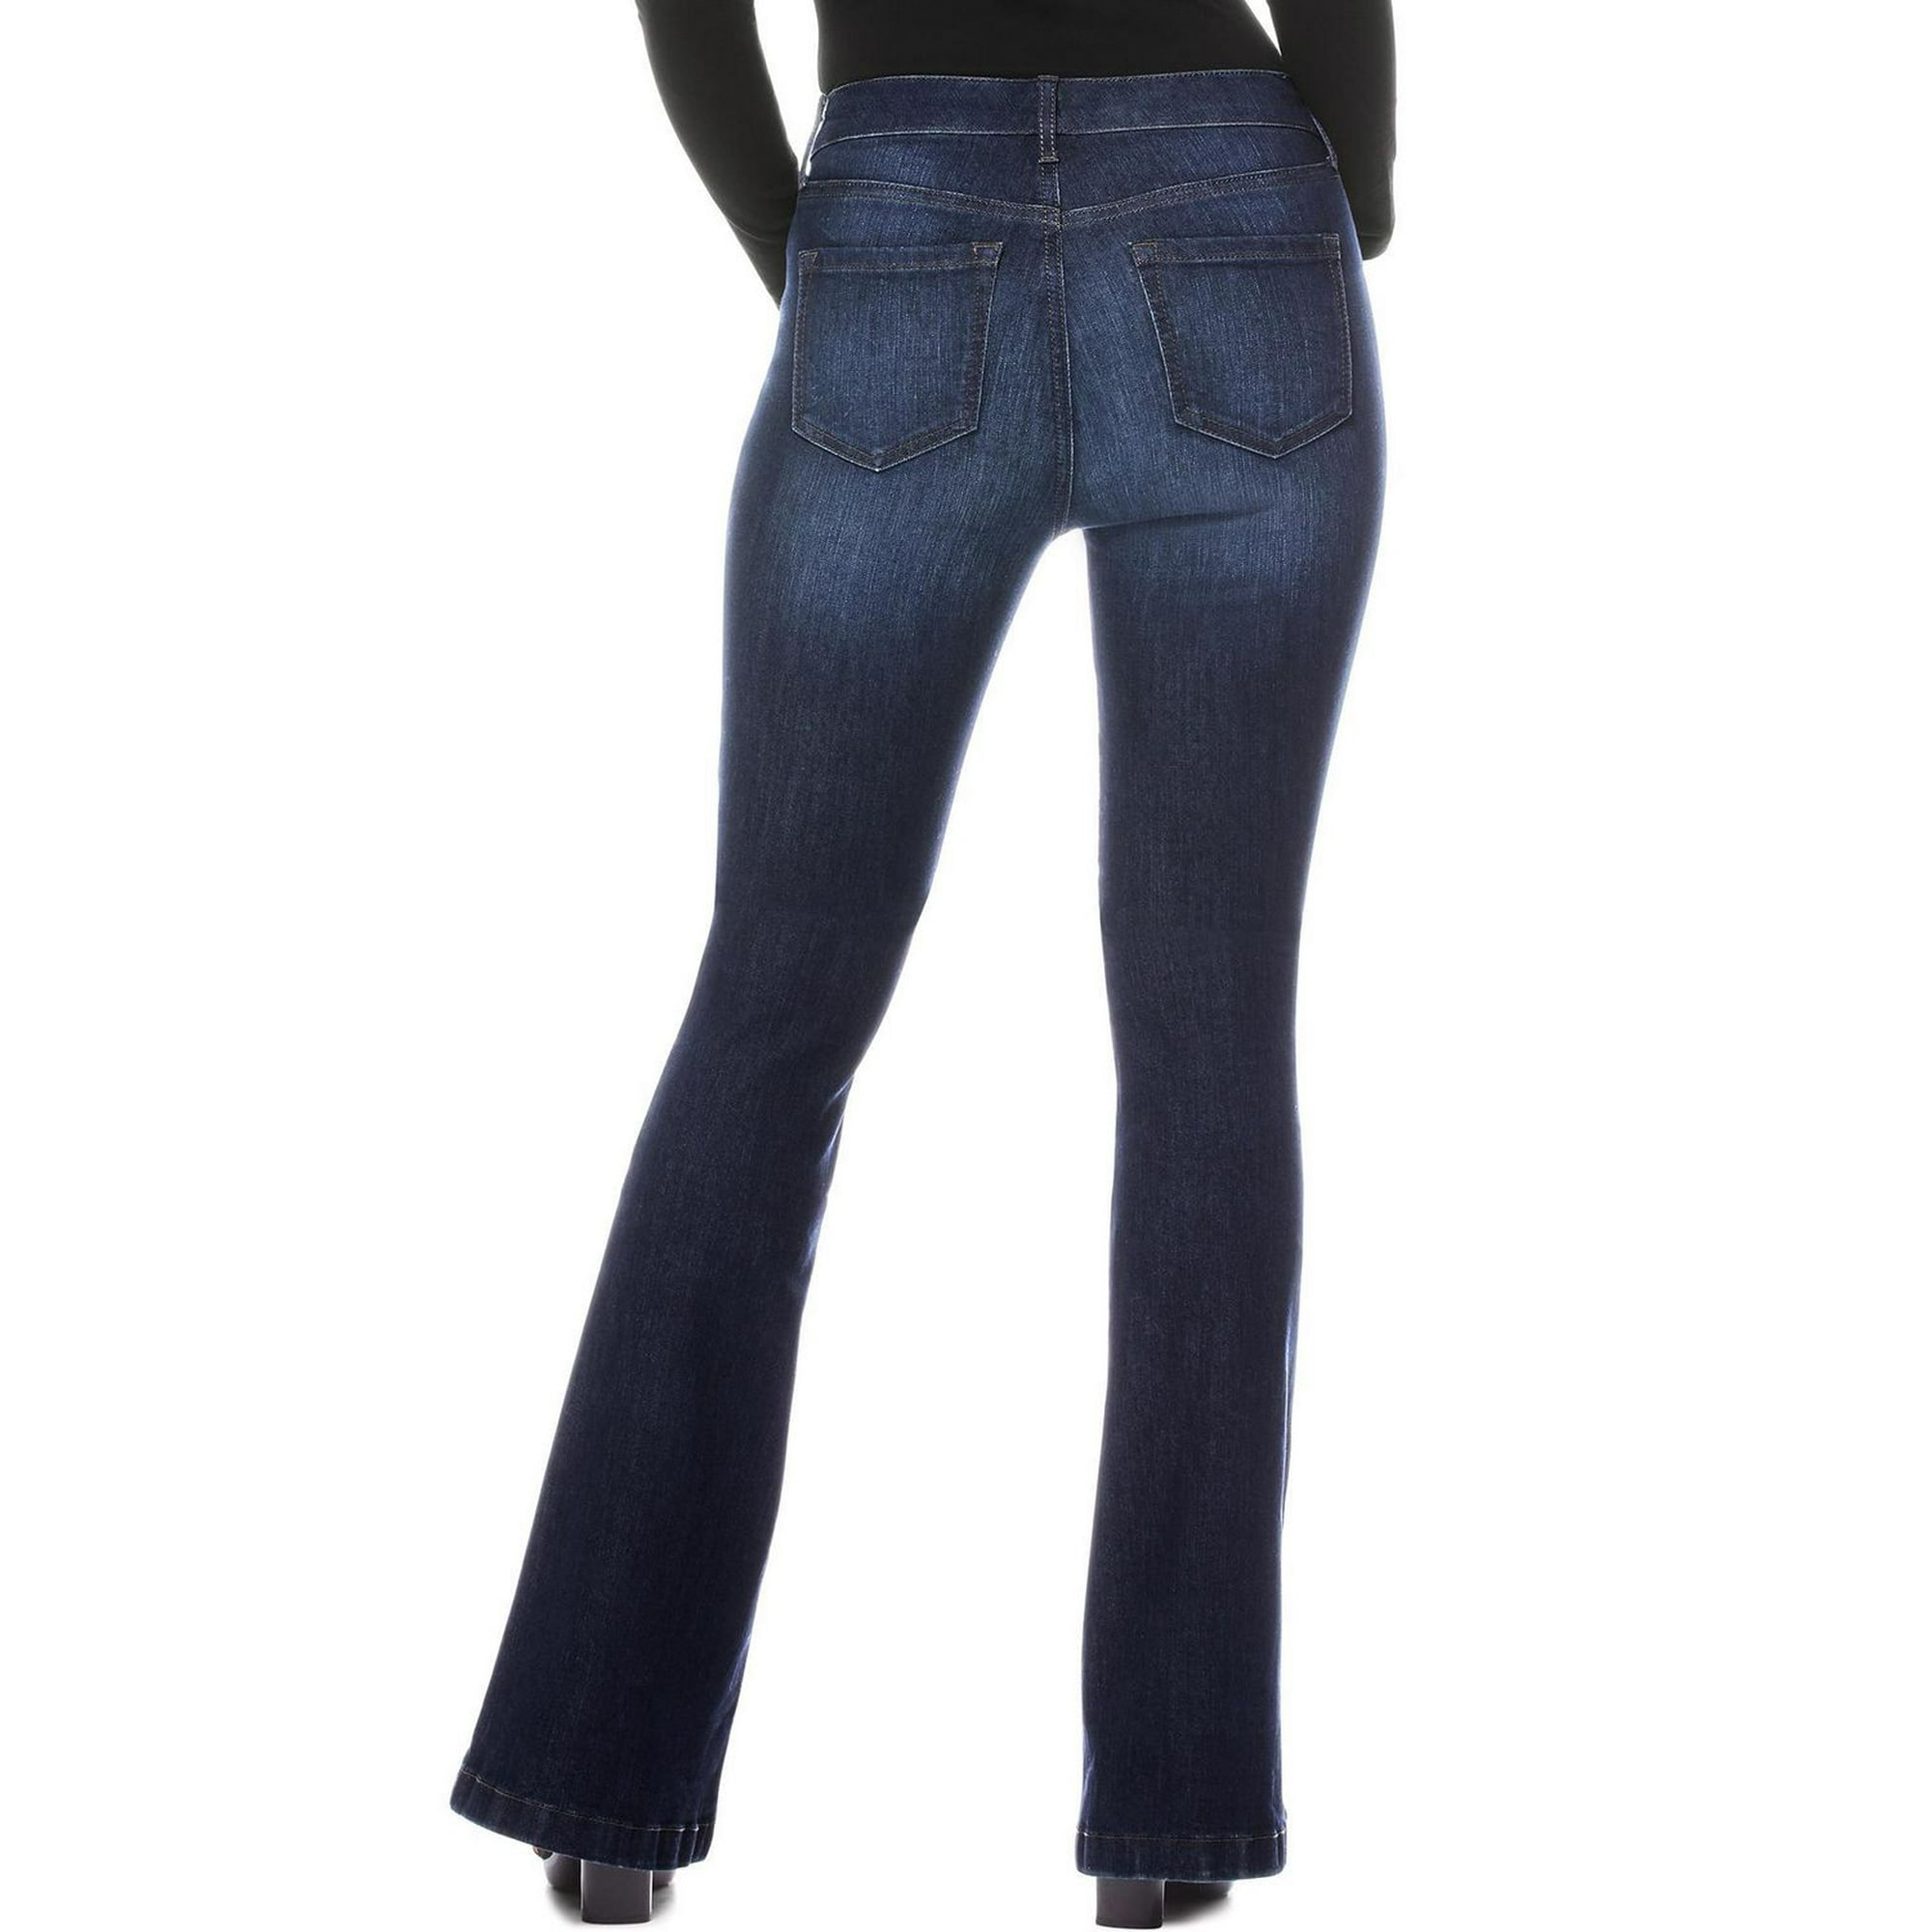 Sofia Vergara Jeans from Walmart – Available in Stores Near You! - Loverly  Grey